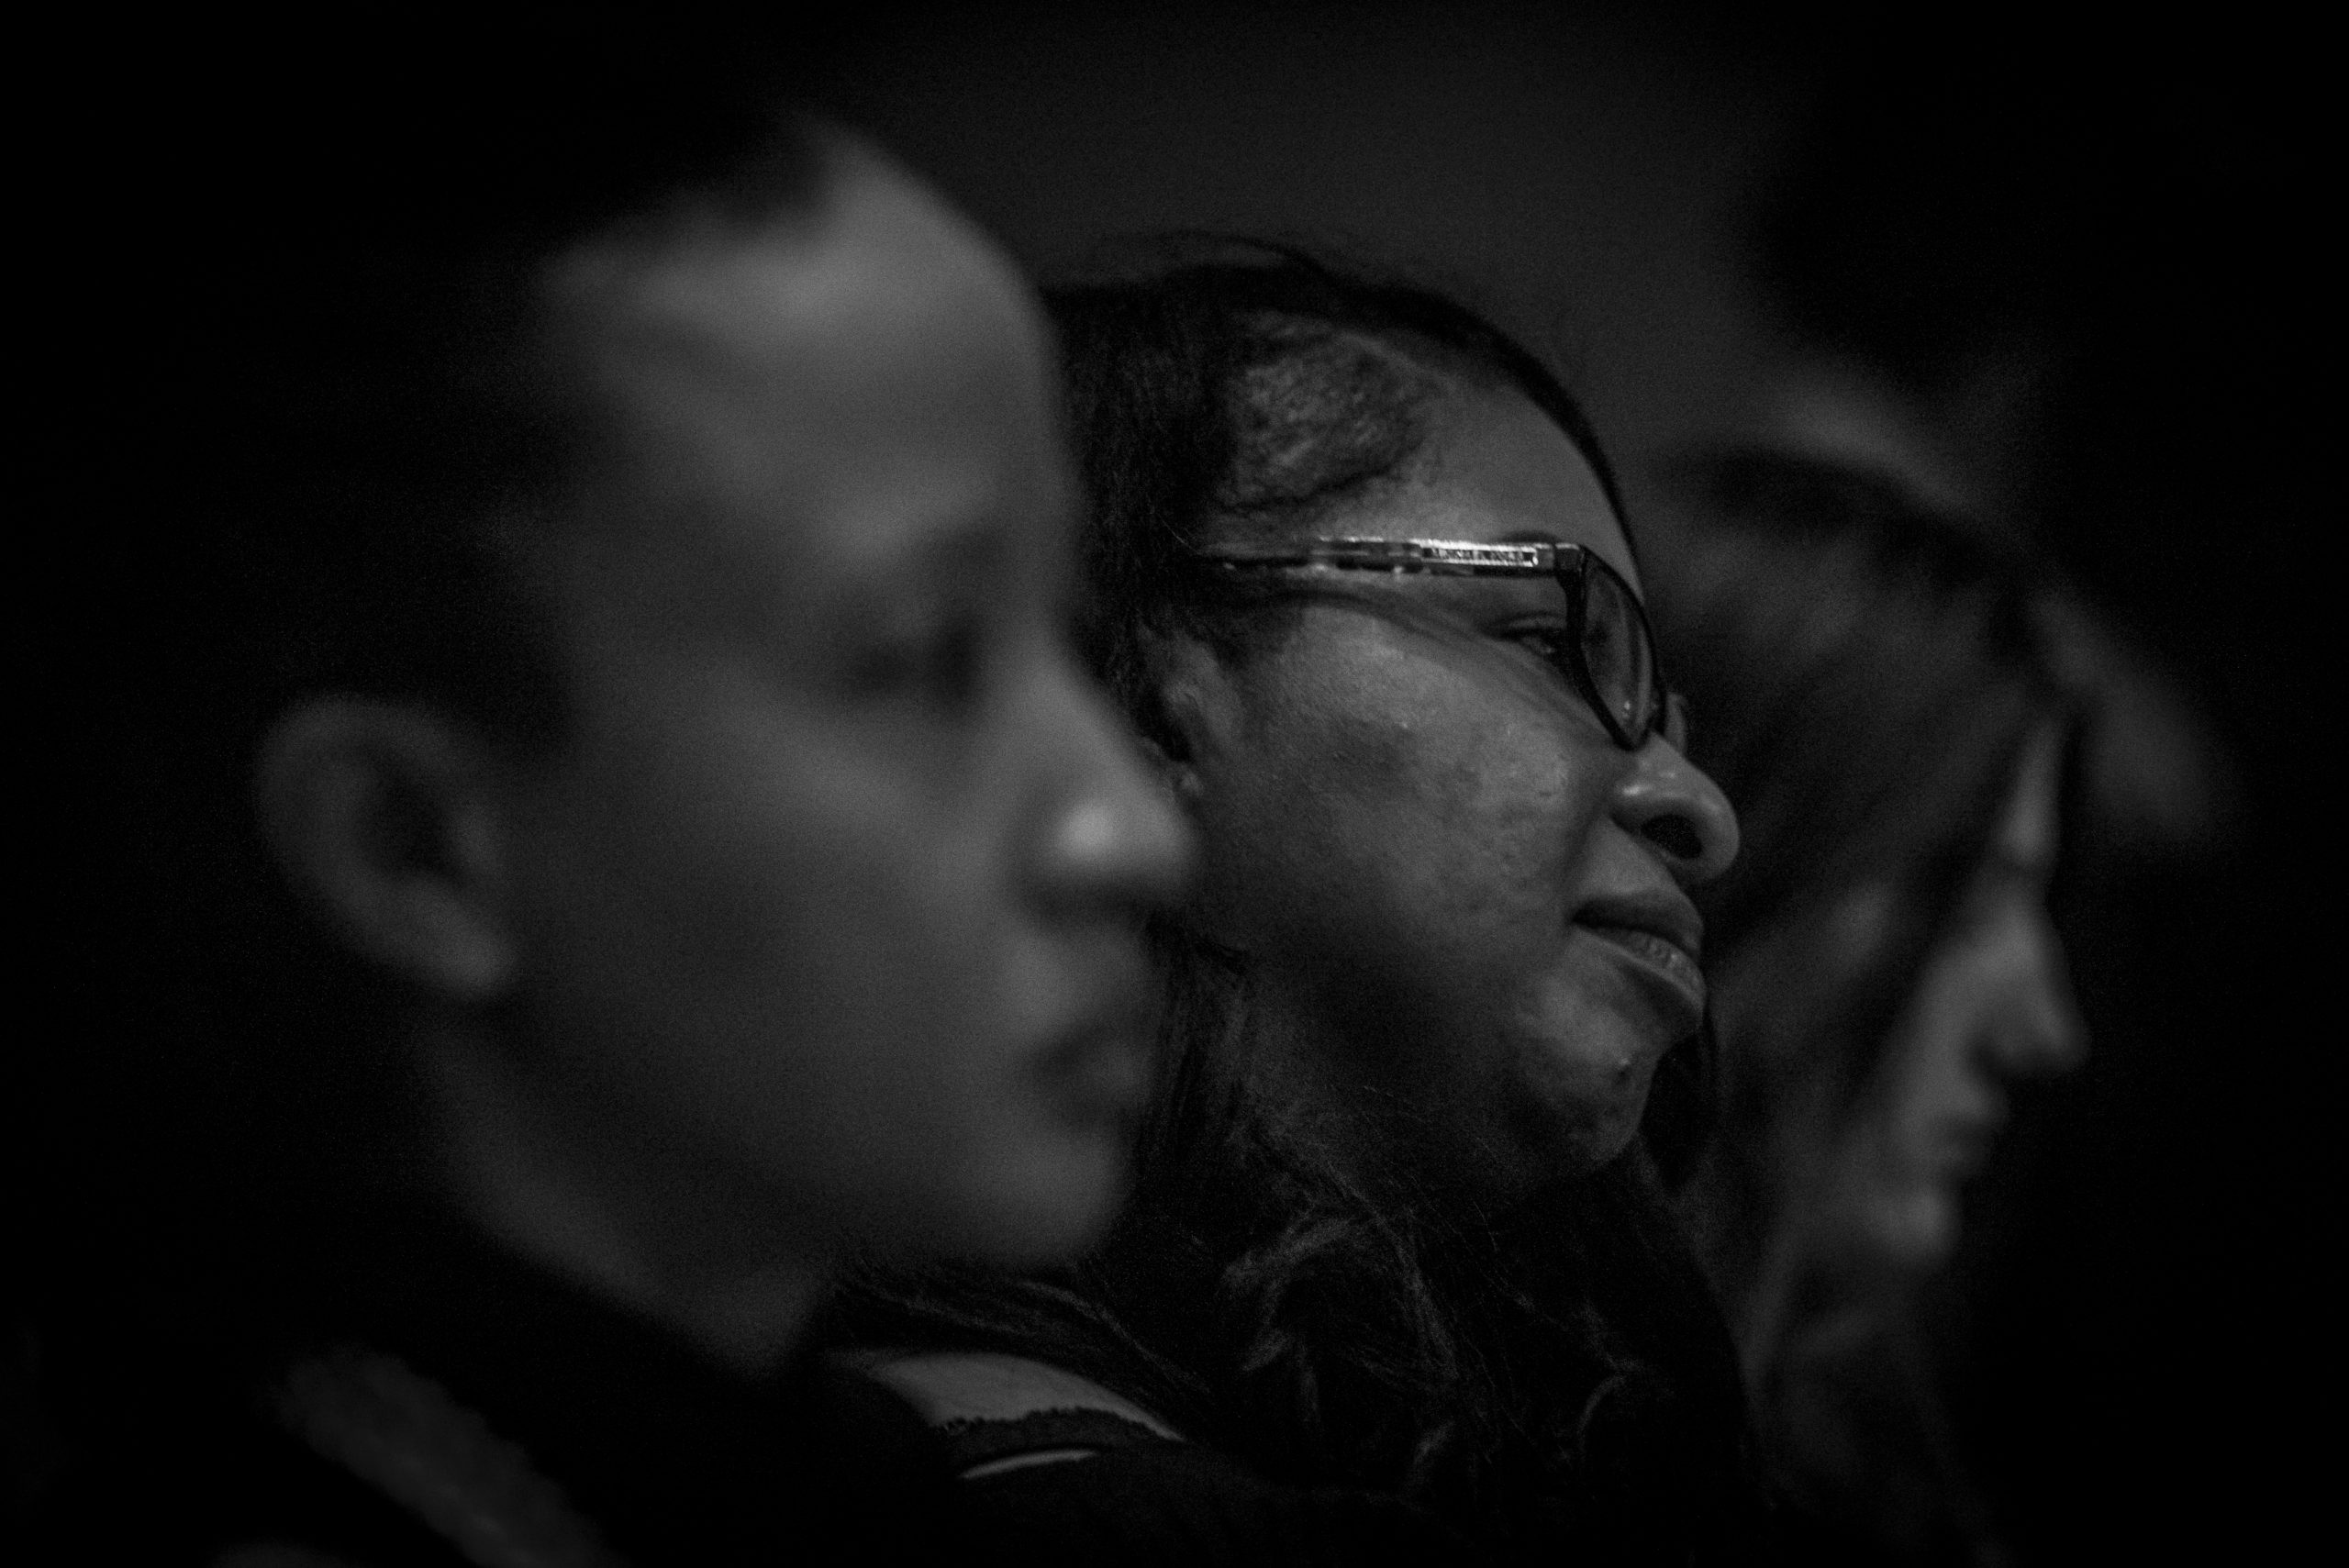 The faces of three women, in profile and black and white, watching Yolanda King speak.